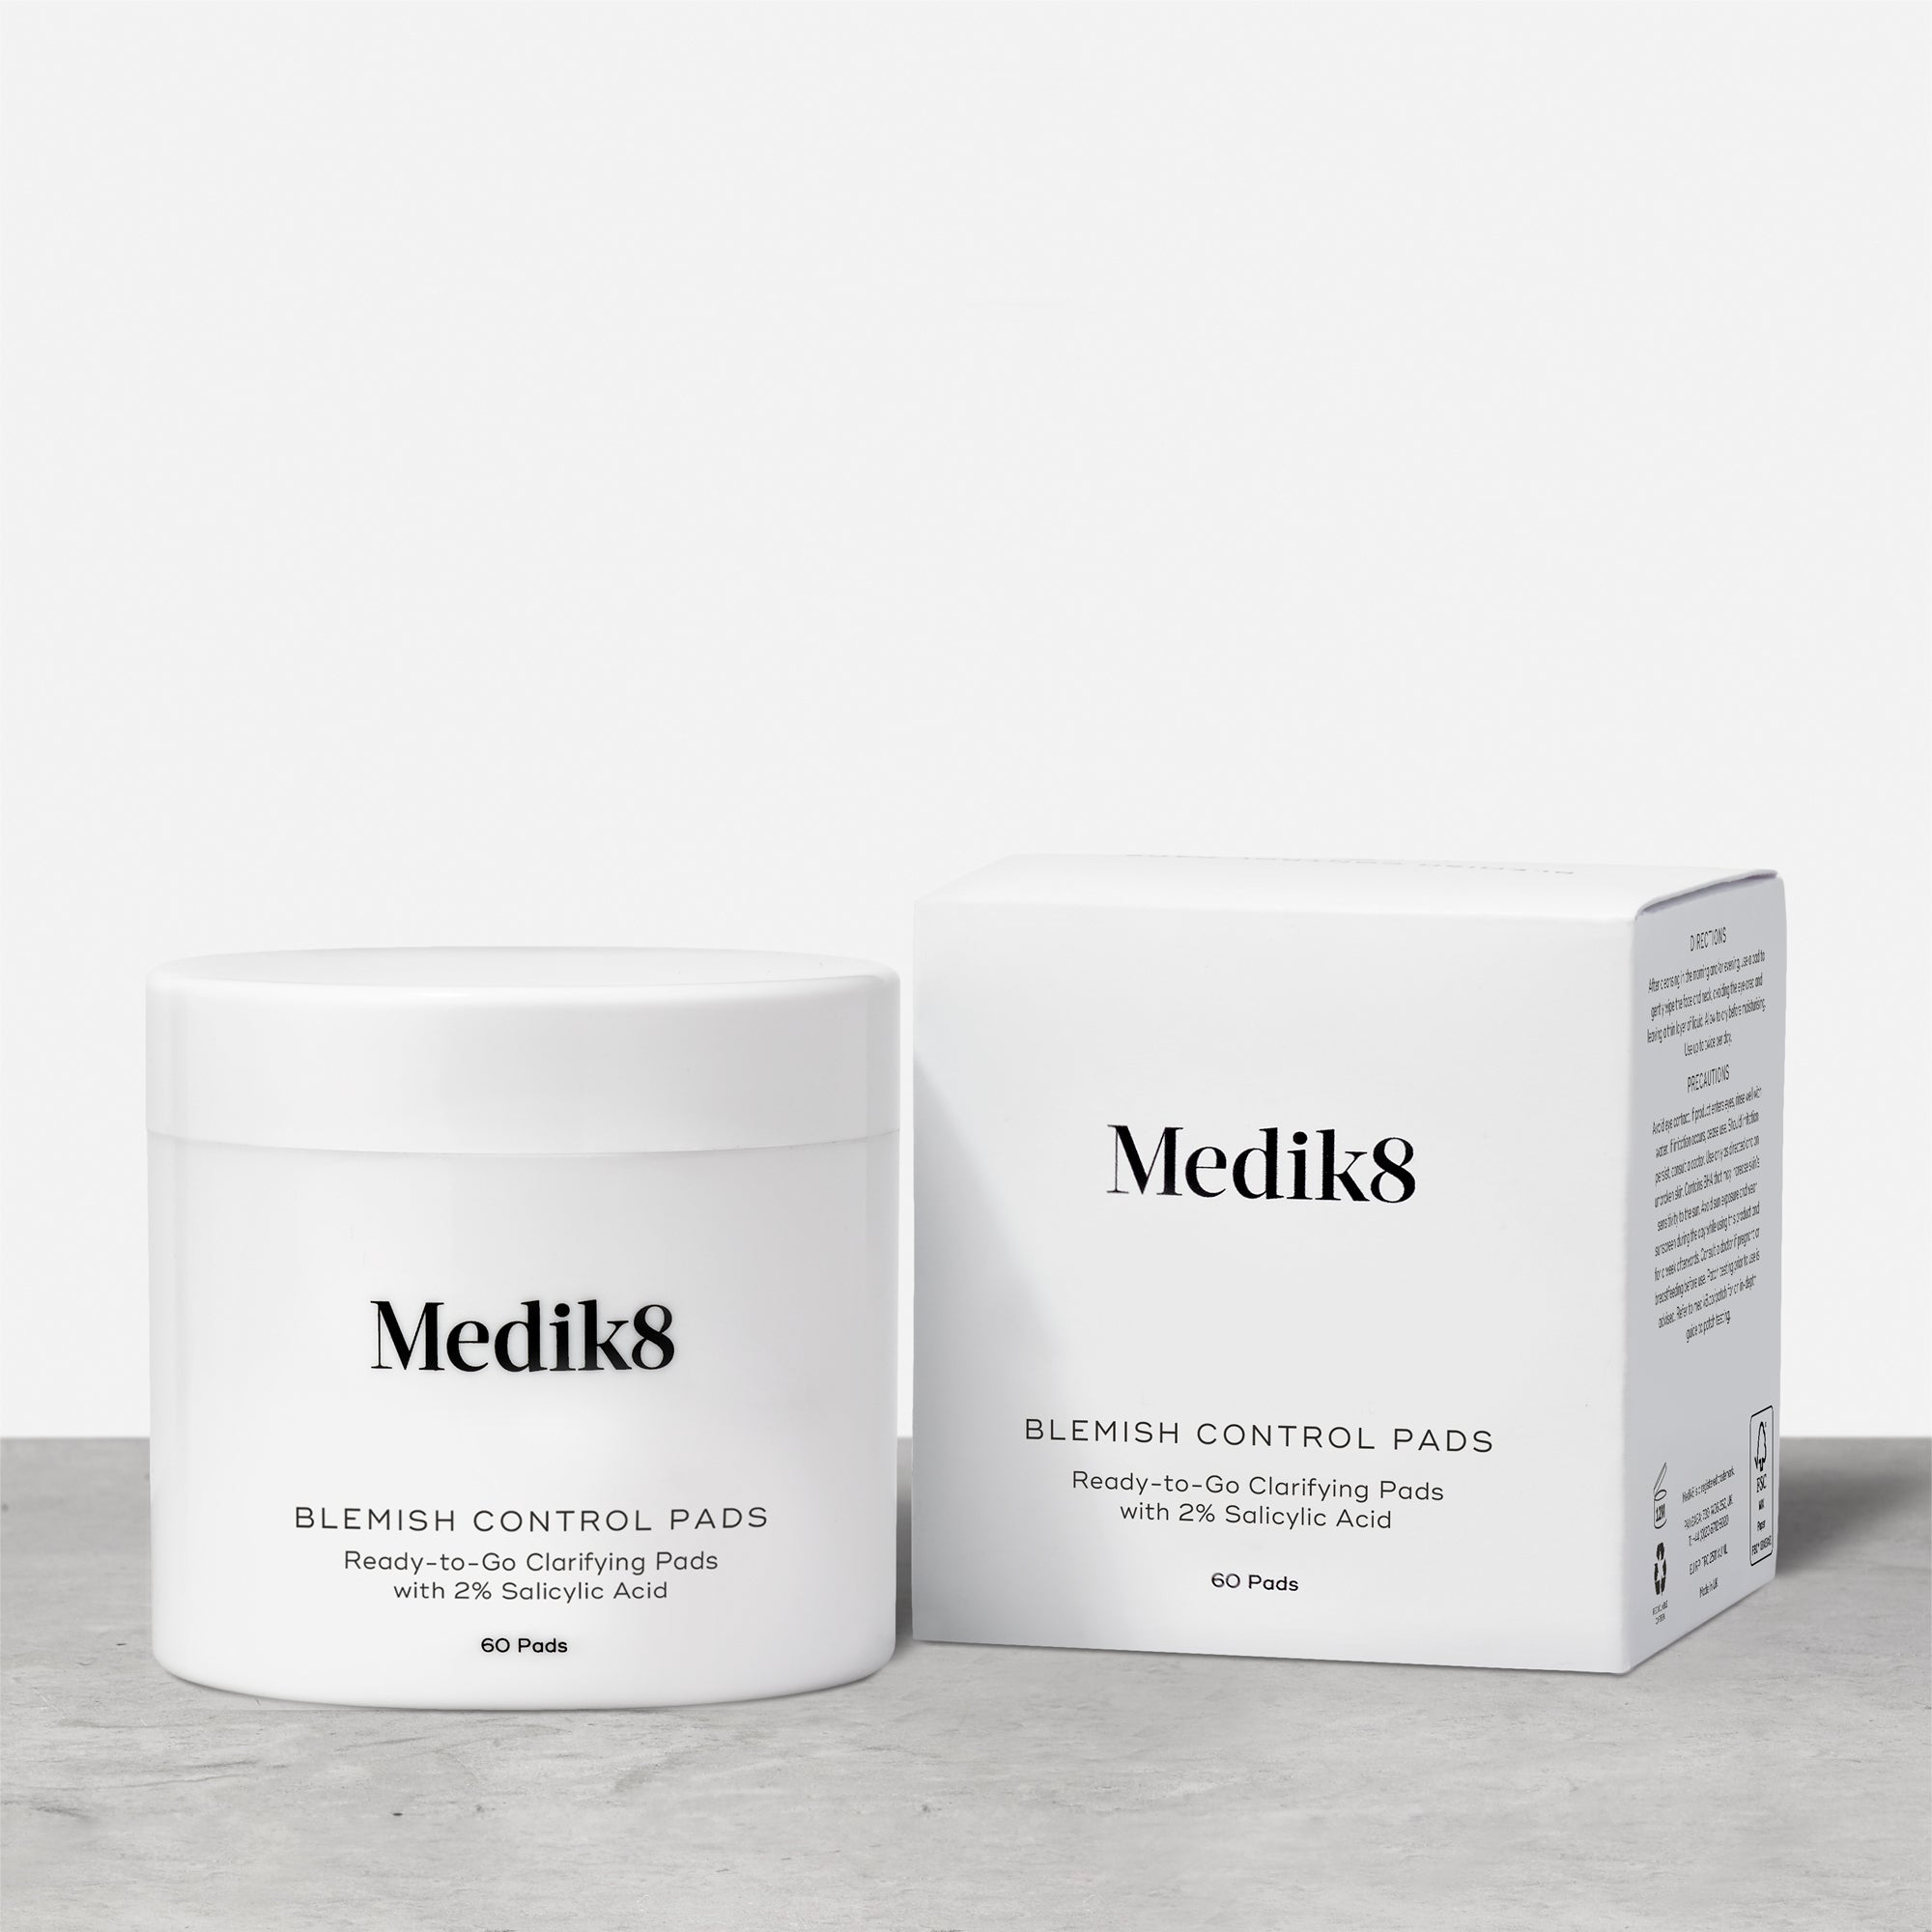 Blemish Control Pads™ by Medik8.  Ready-to-Go Clarifying Pads with 2% Salicylic Acid.